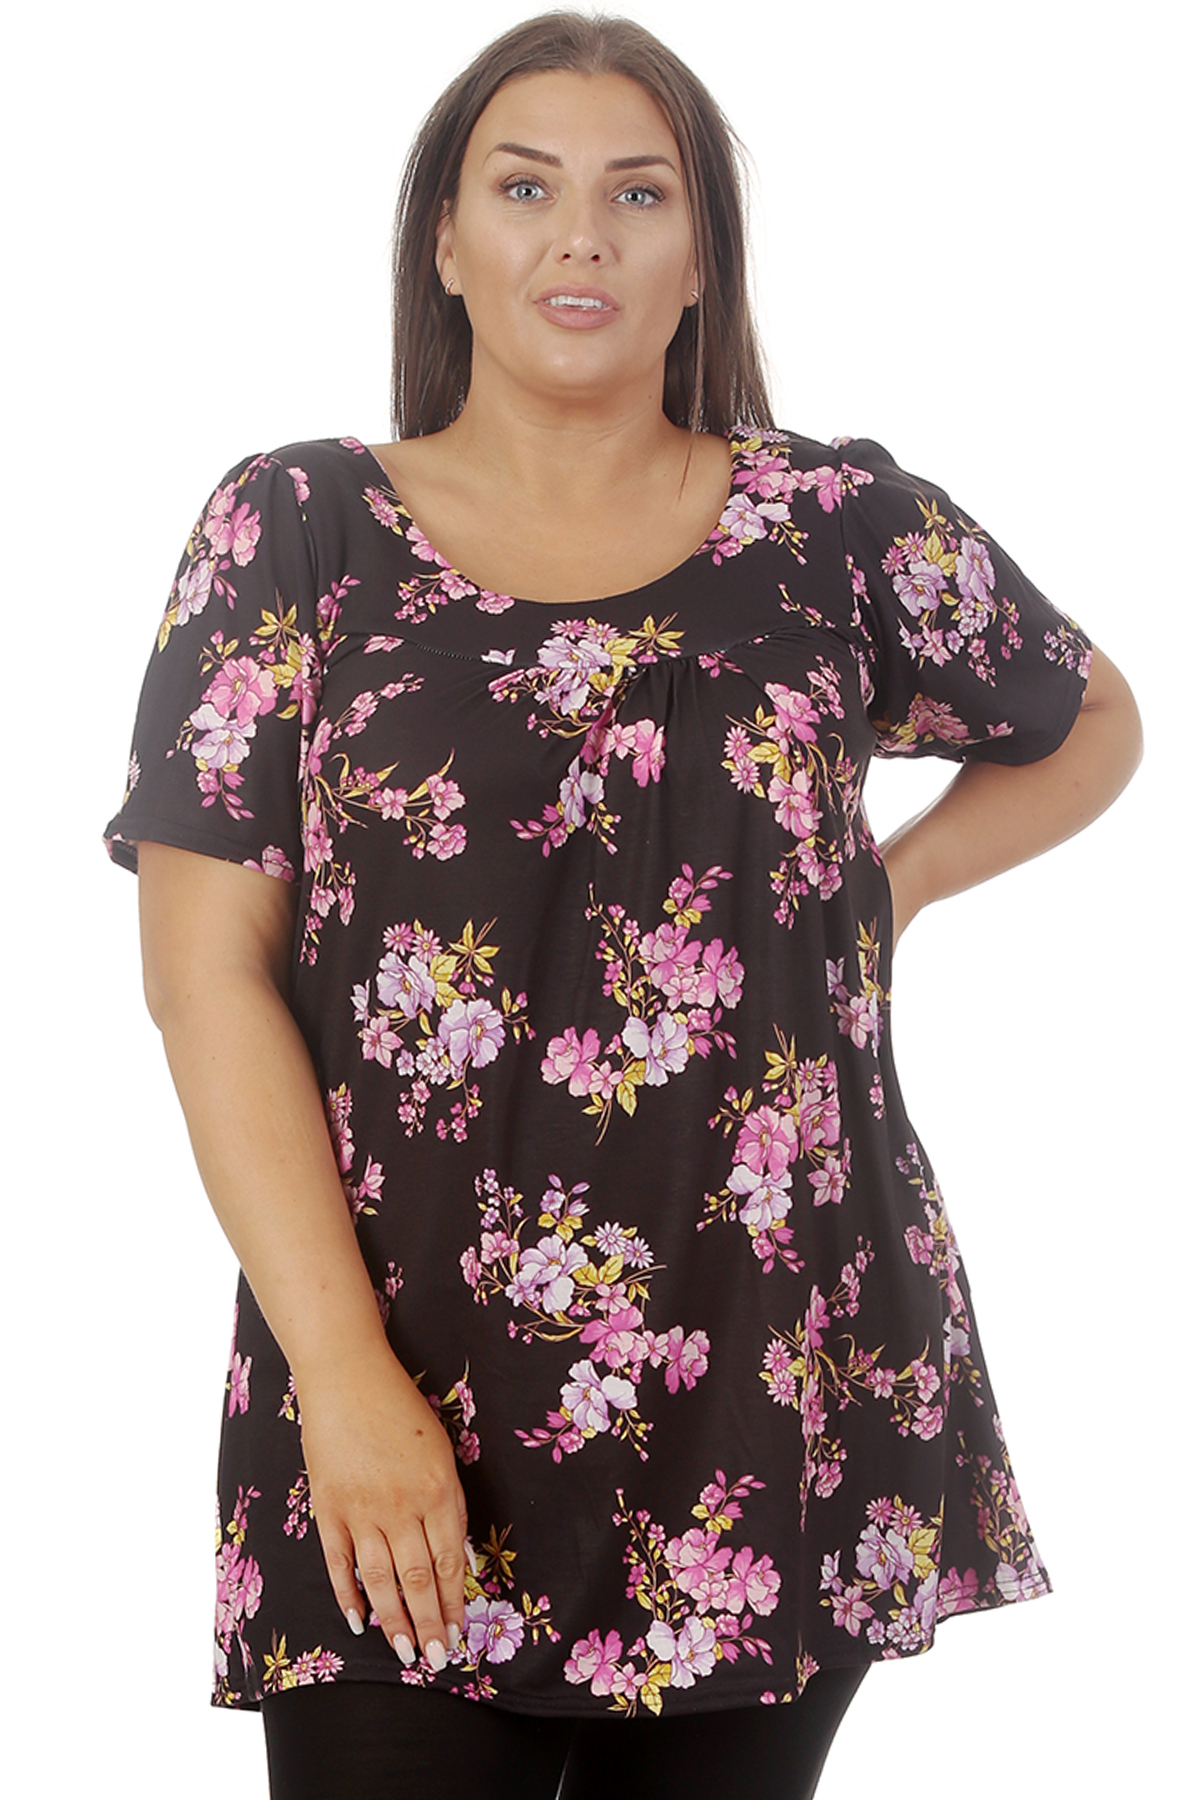 New Womens Plus Size Smock Top Ladies Floral Print Blouse Tunic Short Sleeves 